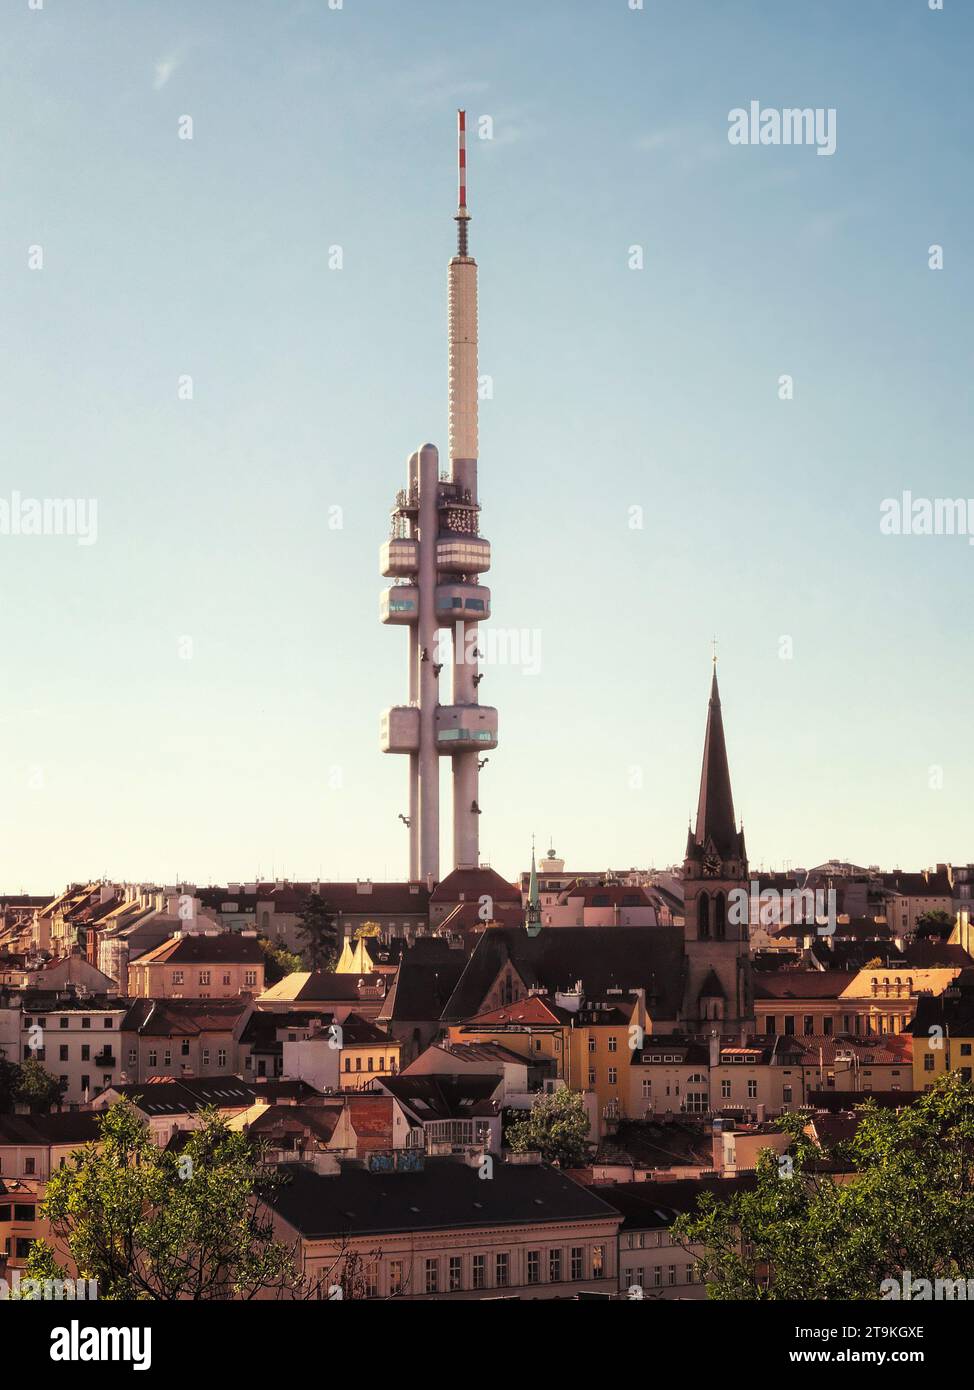 The image shows the Zizkov Television Tower in Prague, Czech Republic. It’s a tall, white structure with multiple levels and a red and white antenna o Stock Photo